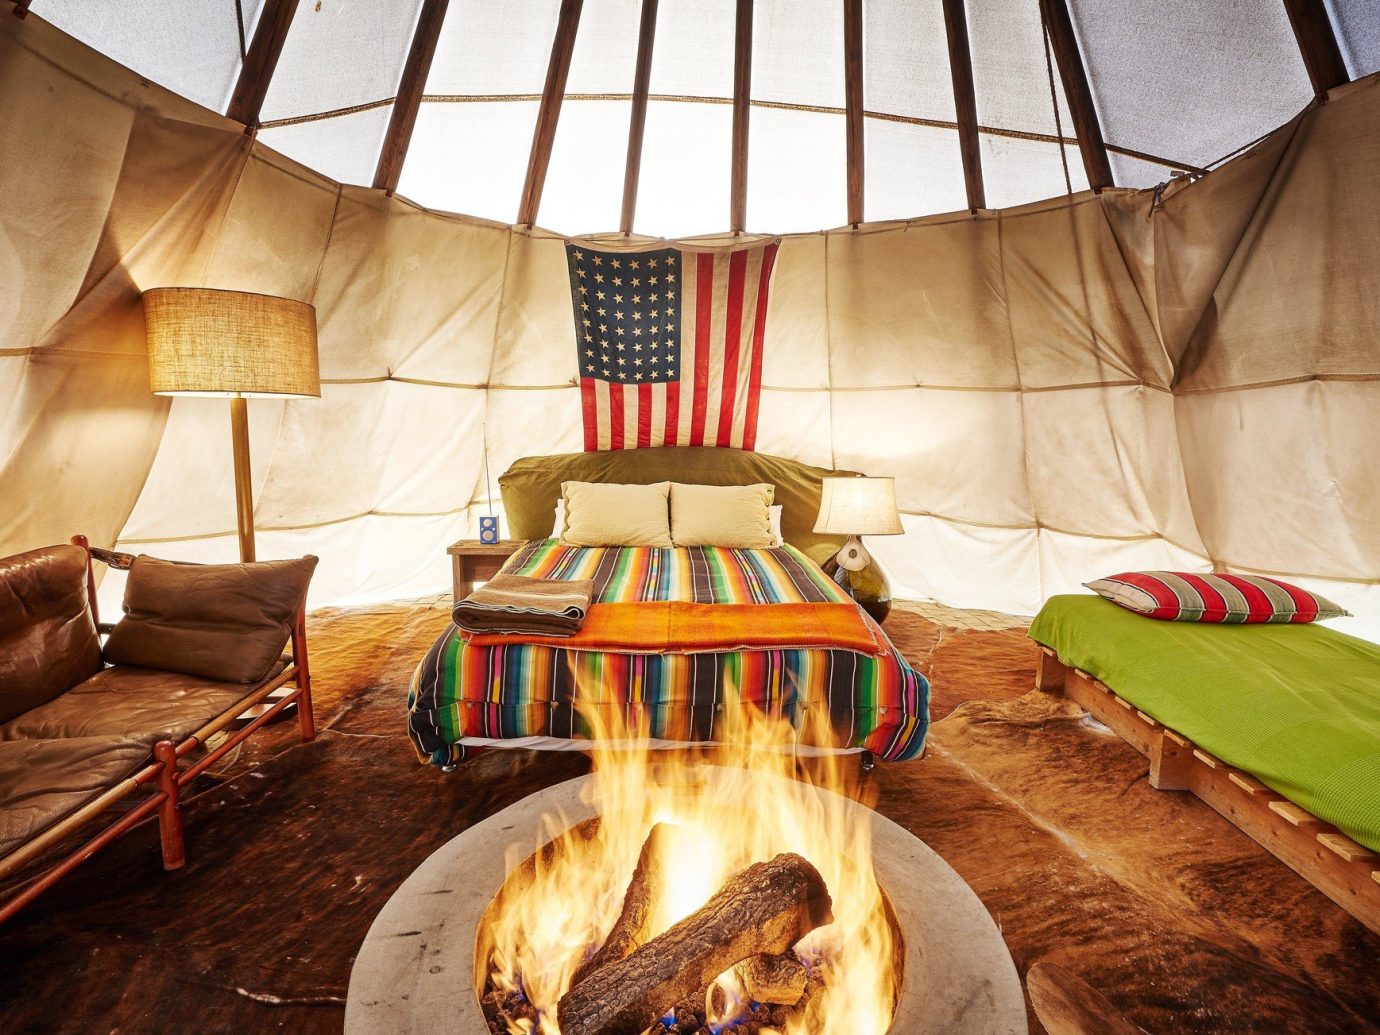 artistic artsy bed Bedroom cozy fire Firepit Fireplace Hip Hotels interior isolation living area quirky remote Solo Travel teepee trendy Trip Ideas indoor decorated bedclothes furniture